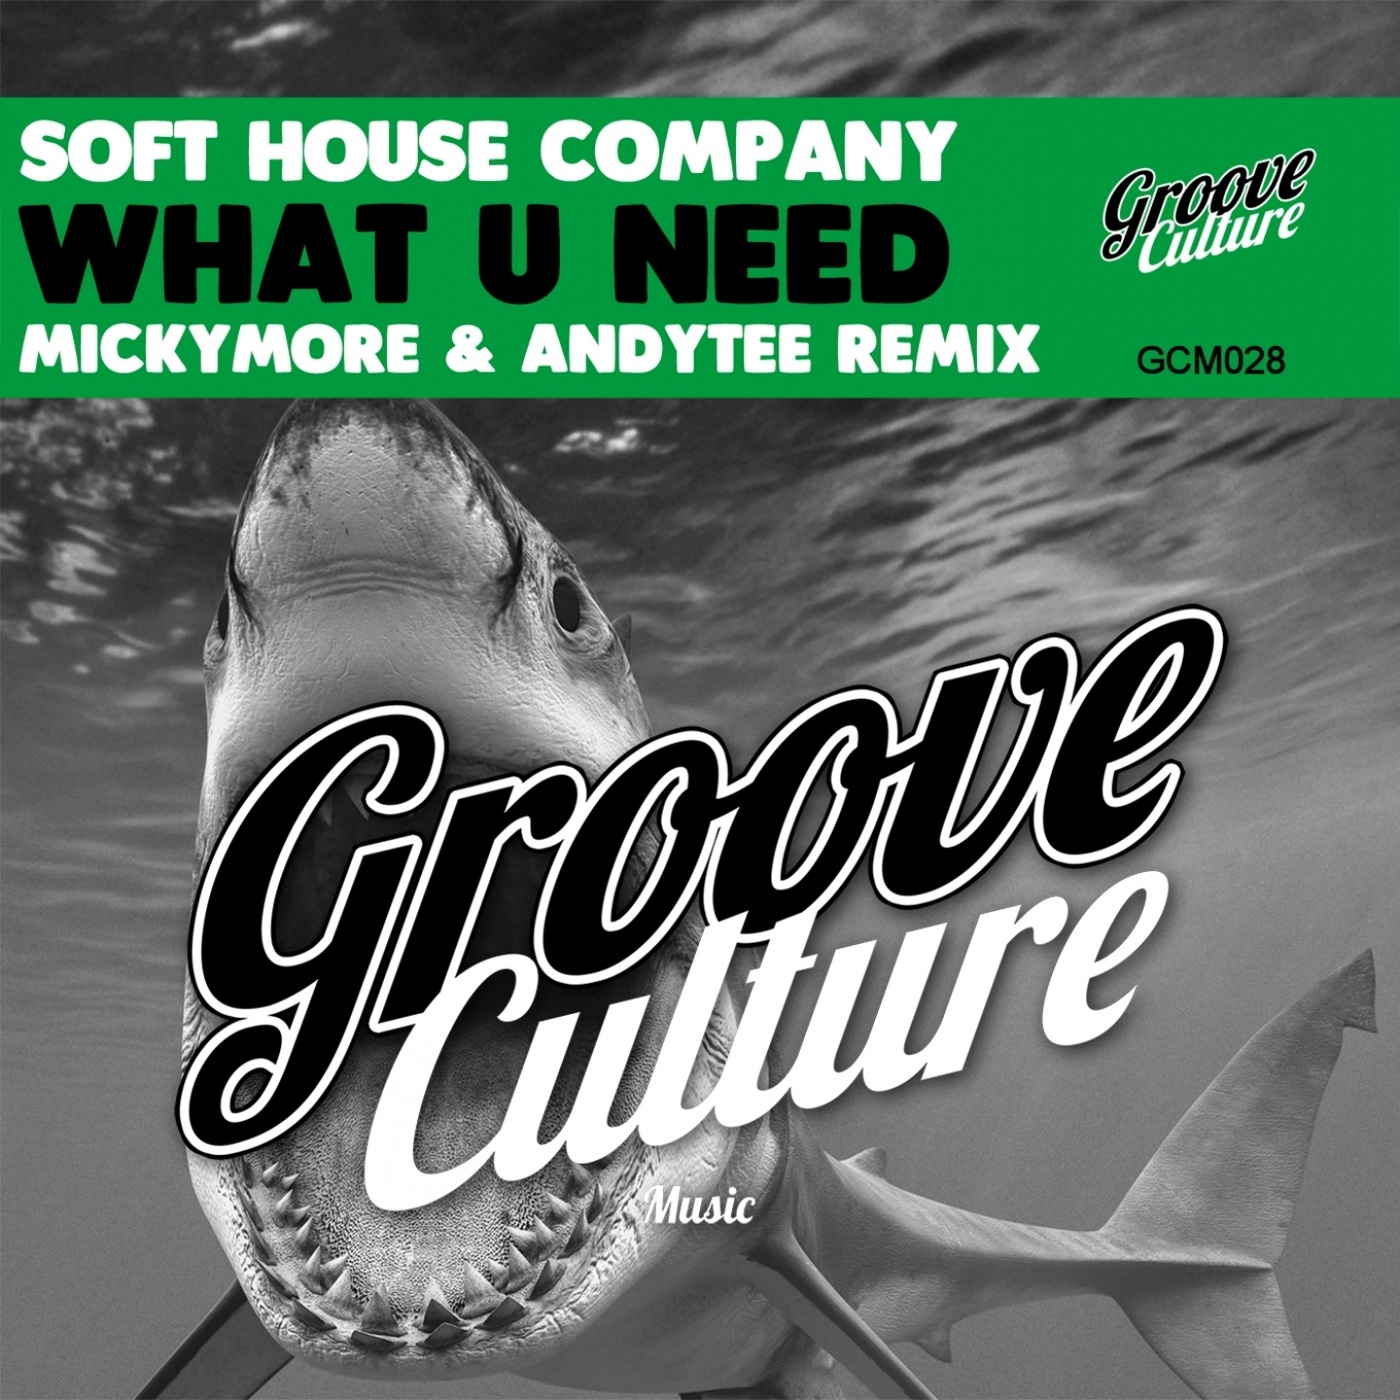 Soft House Company - What You Need (Micky More, Andy Tee Remix) / Groove Culture